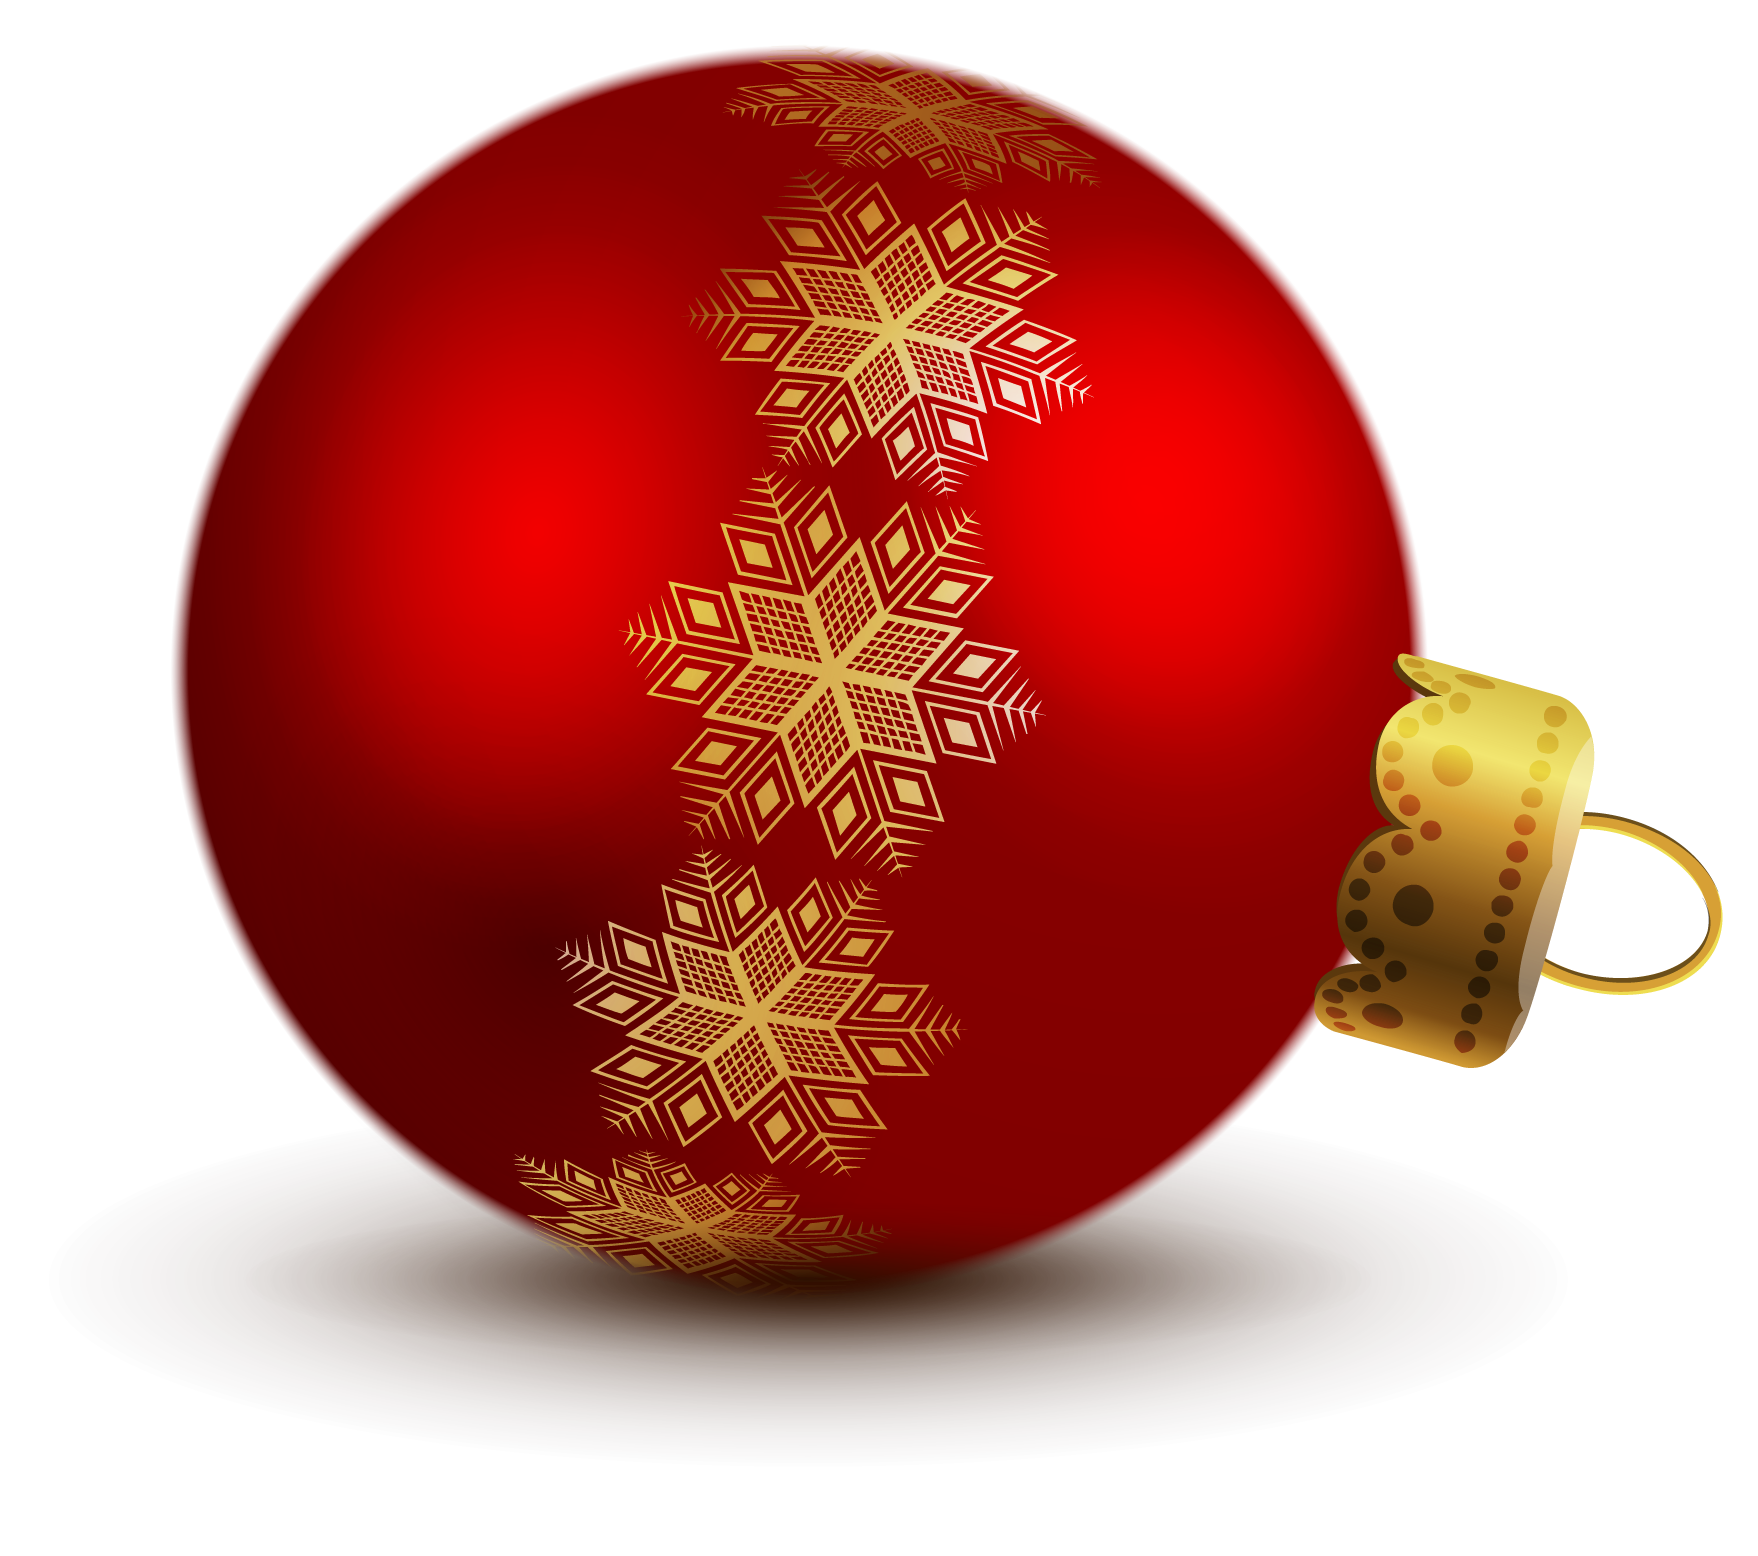 Free Christmas Ornaments Image, Download Free Christmas Ornaments Image